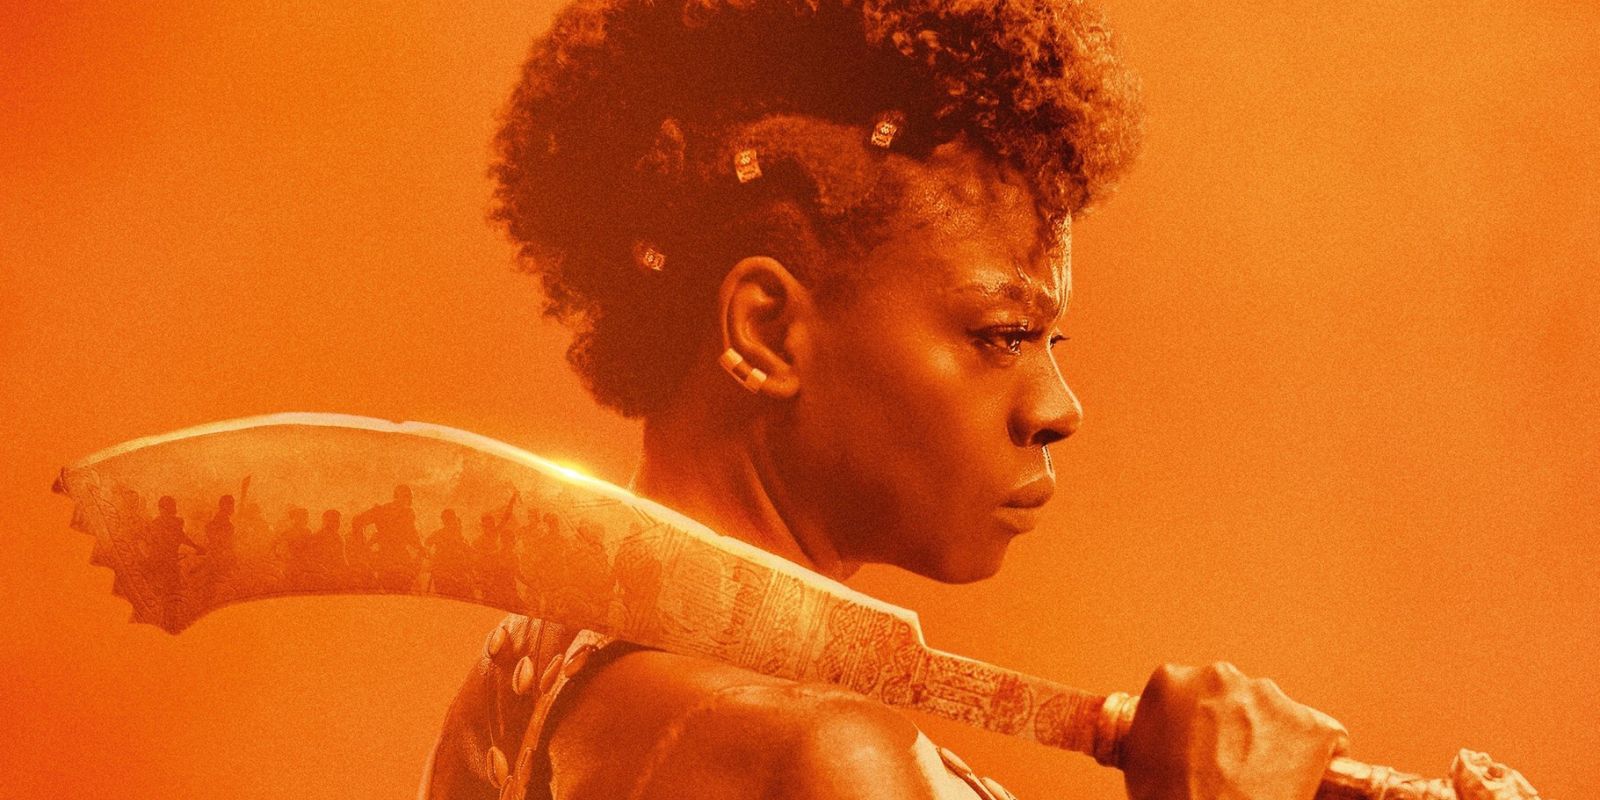 Viola Davis in The Woman King posing with a sword on her shoulder